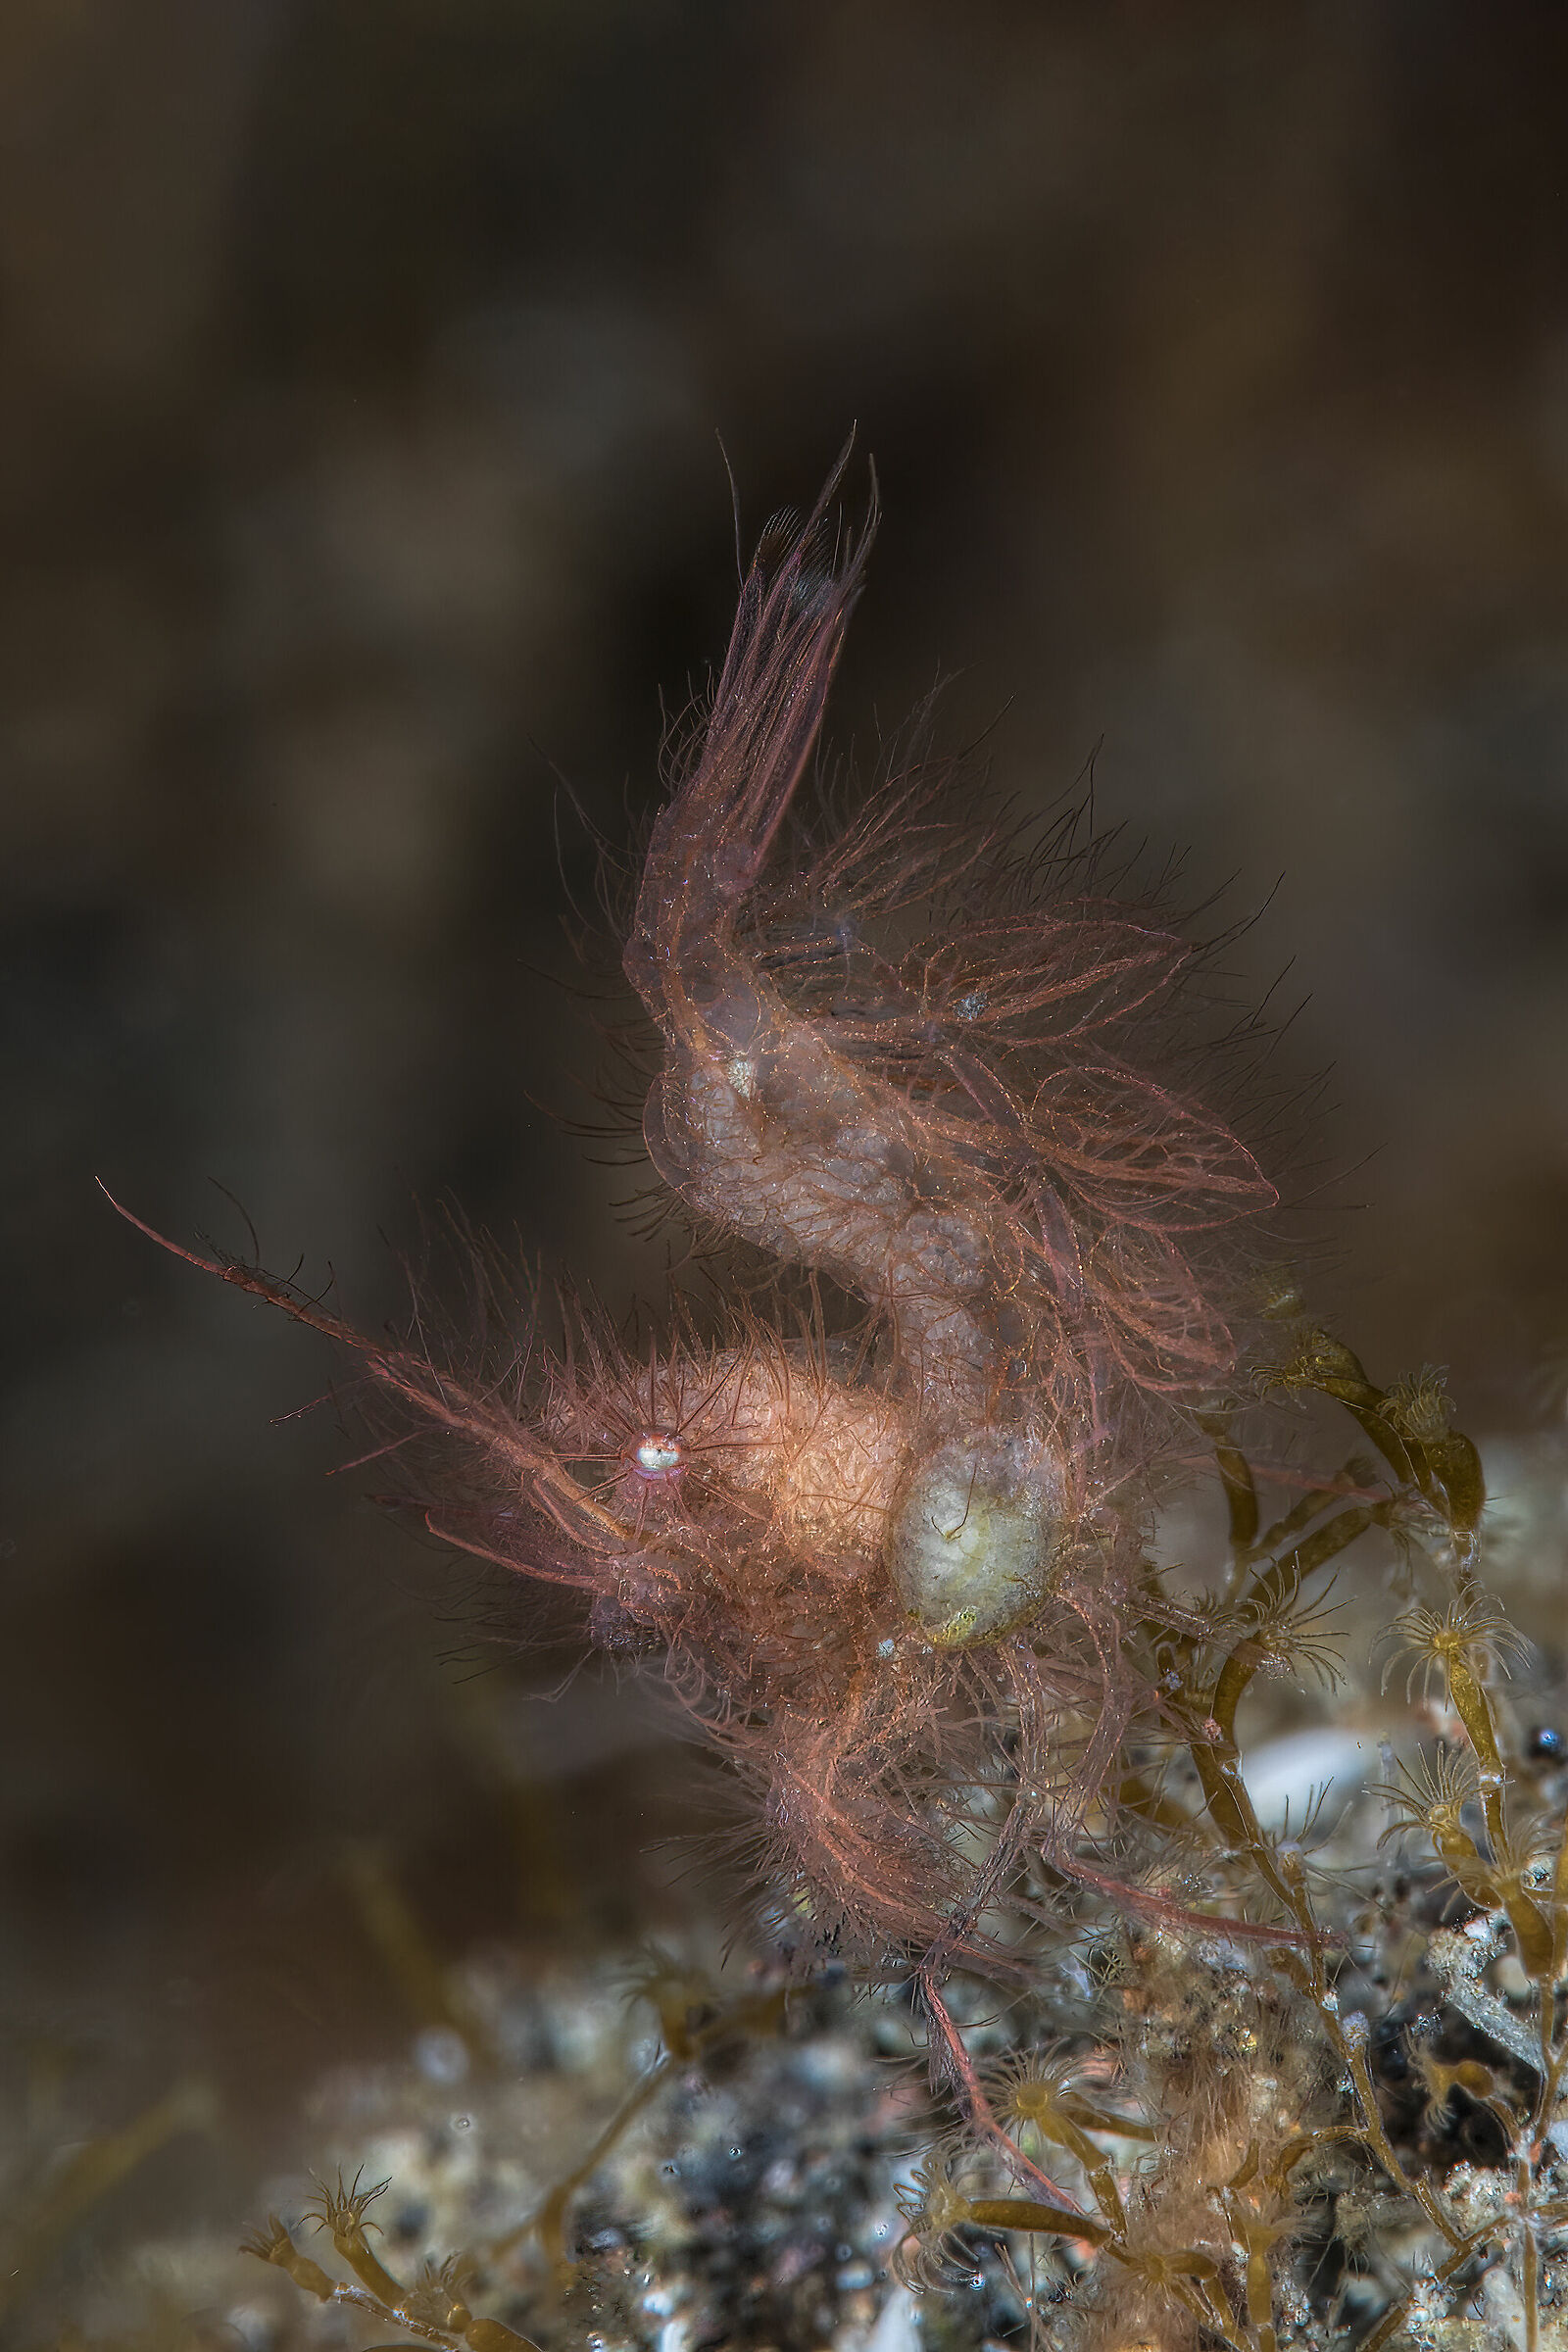 The Hairy Shrimp (phycocaris simulans) with parassite...